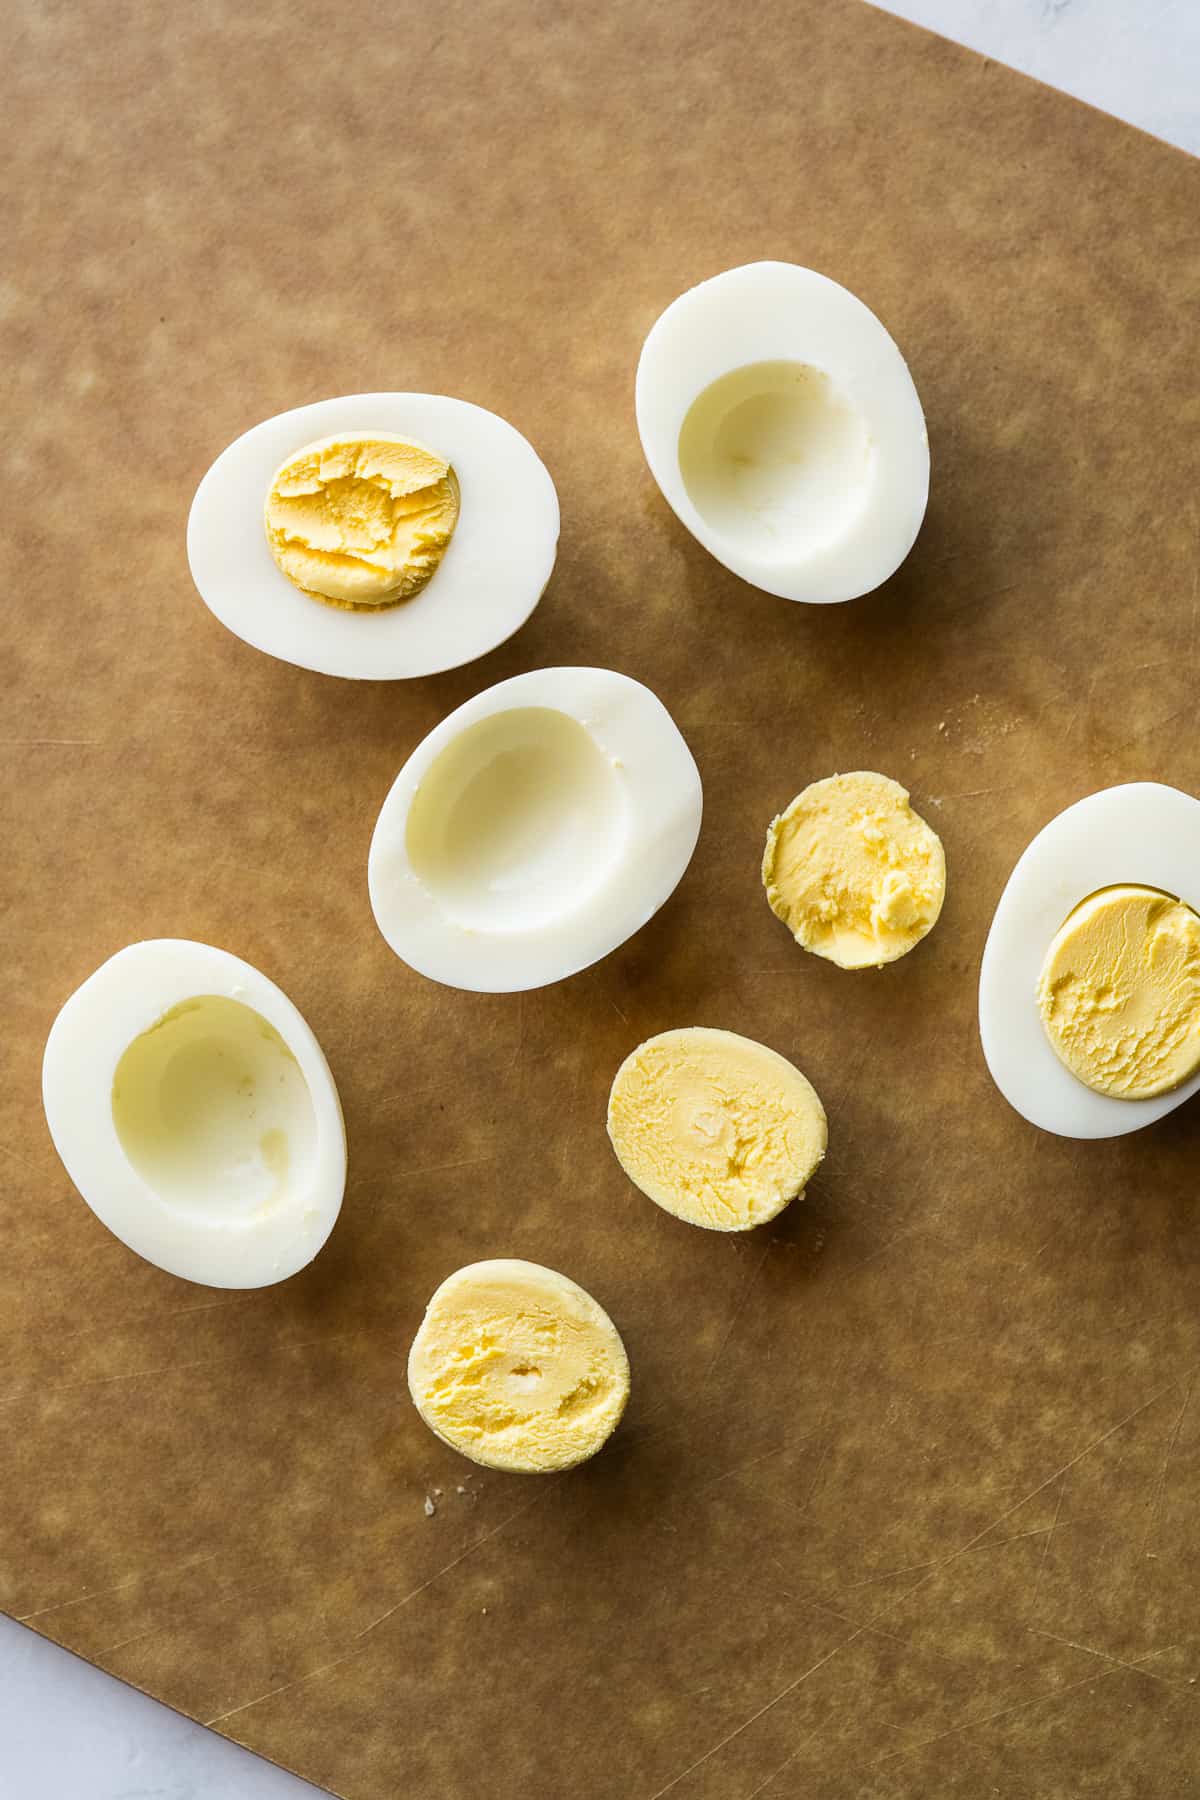 Hard boiled eggs sliced in half and the yolks taken out.